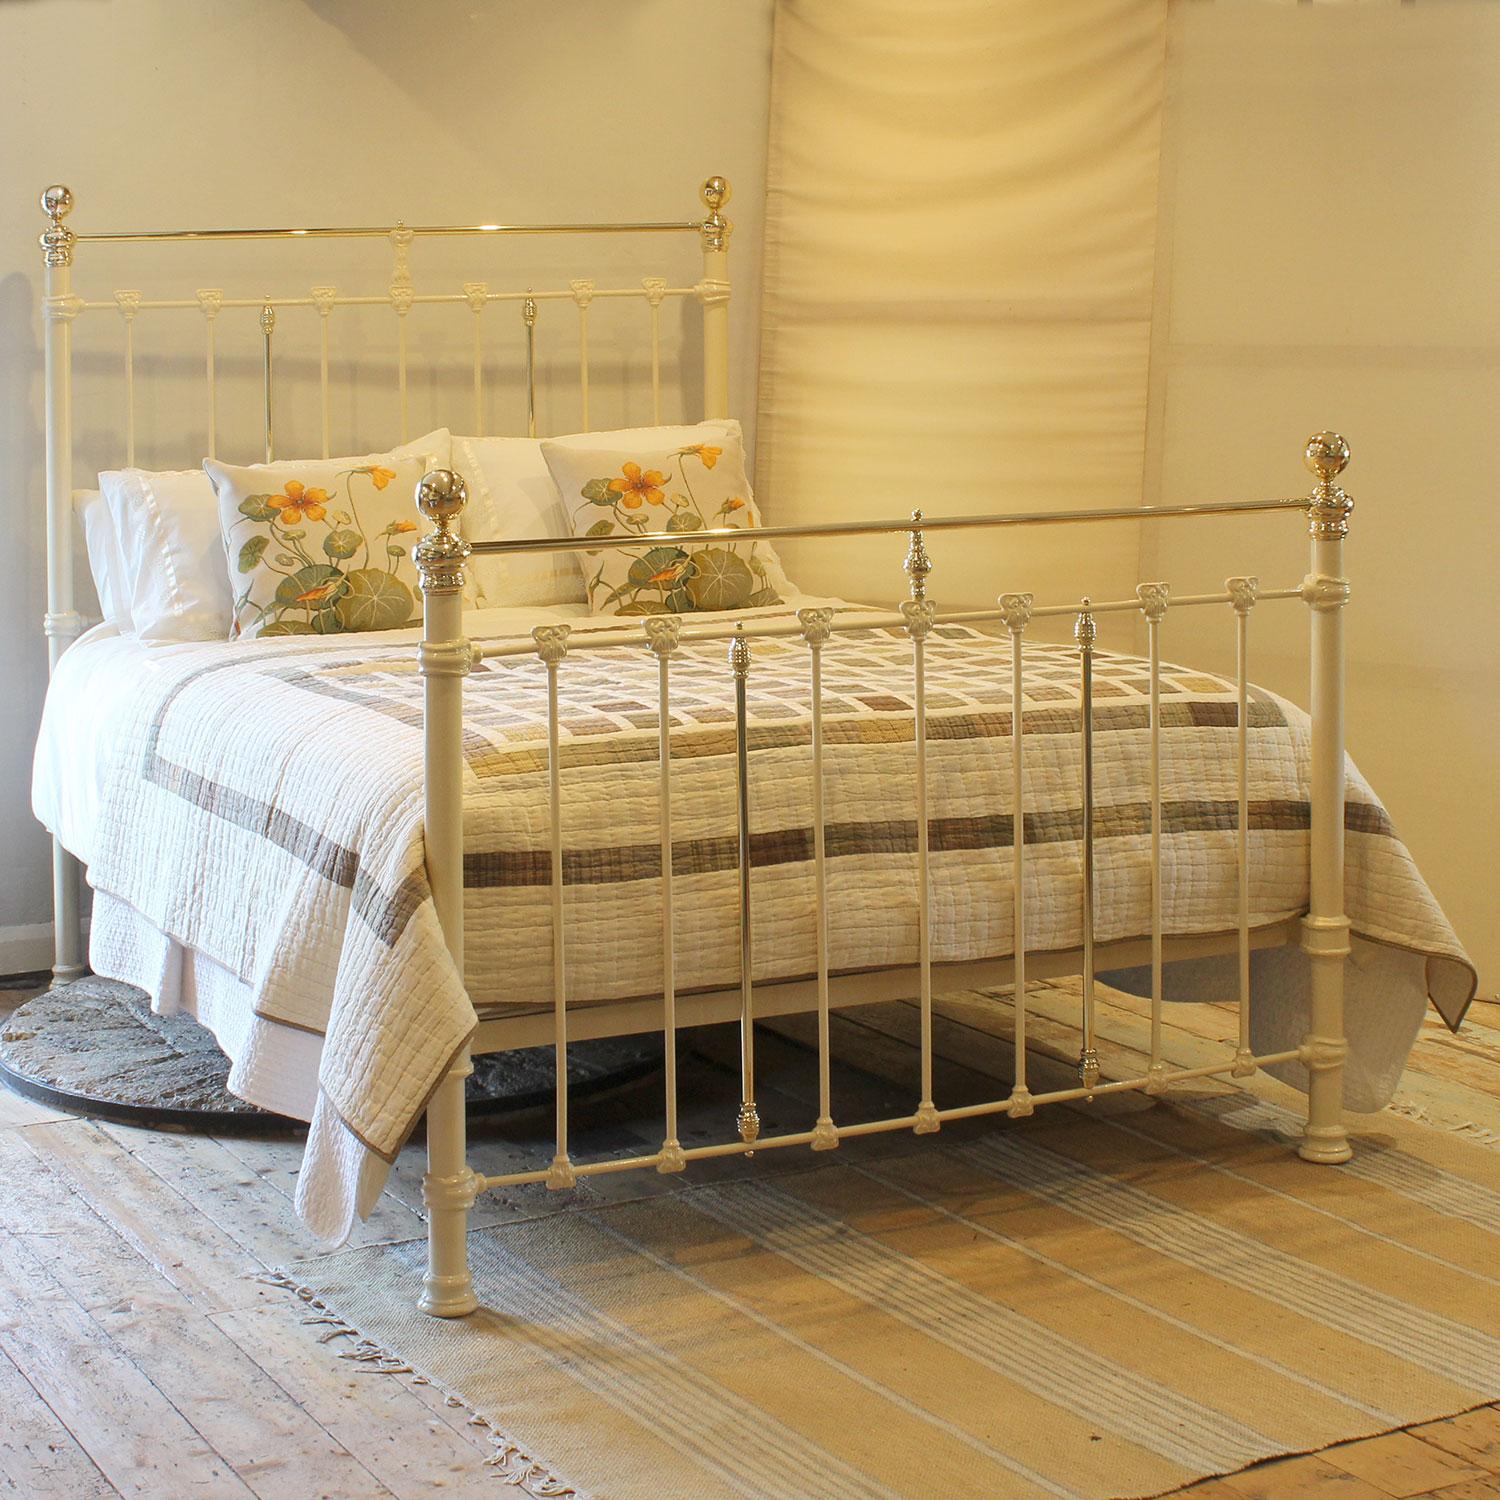 An attractive cast iron antique bed finished in cream with straight brass top rails and decorative castings depicting Art Nouveau floral designs.

This bed accepts a UK king size or US queen size (5ft, 60in or 150cm wide) base and mattress set.

The